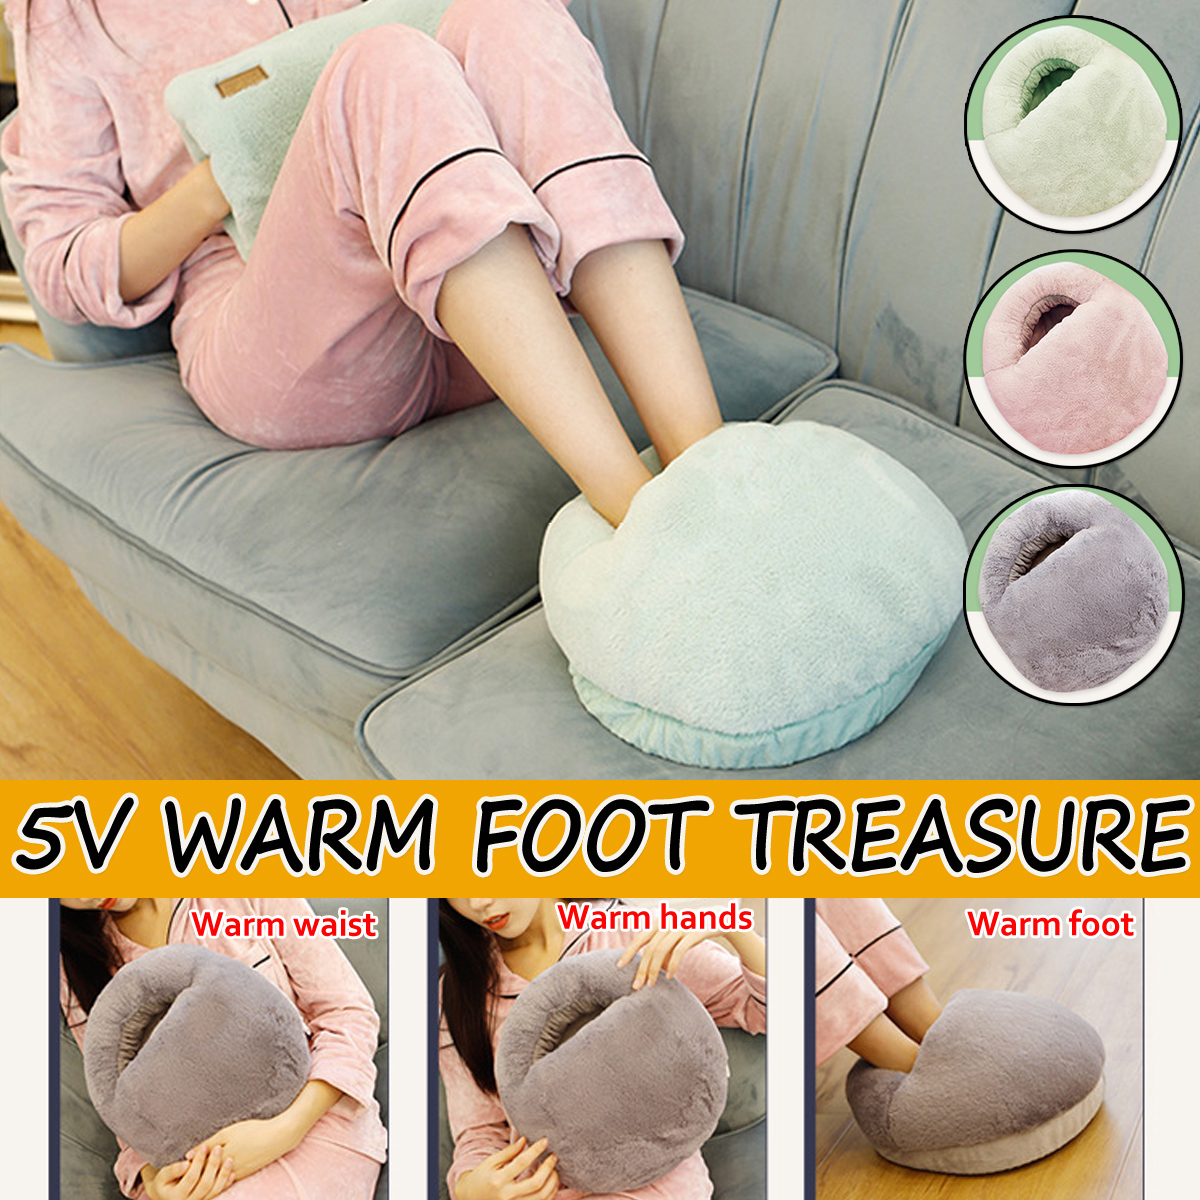 USB-Rechargeable-5v-Warm-Waist-Hand-Foot-Treasure-Tool-Electric-Massager-1570002-1